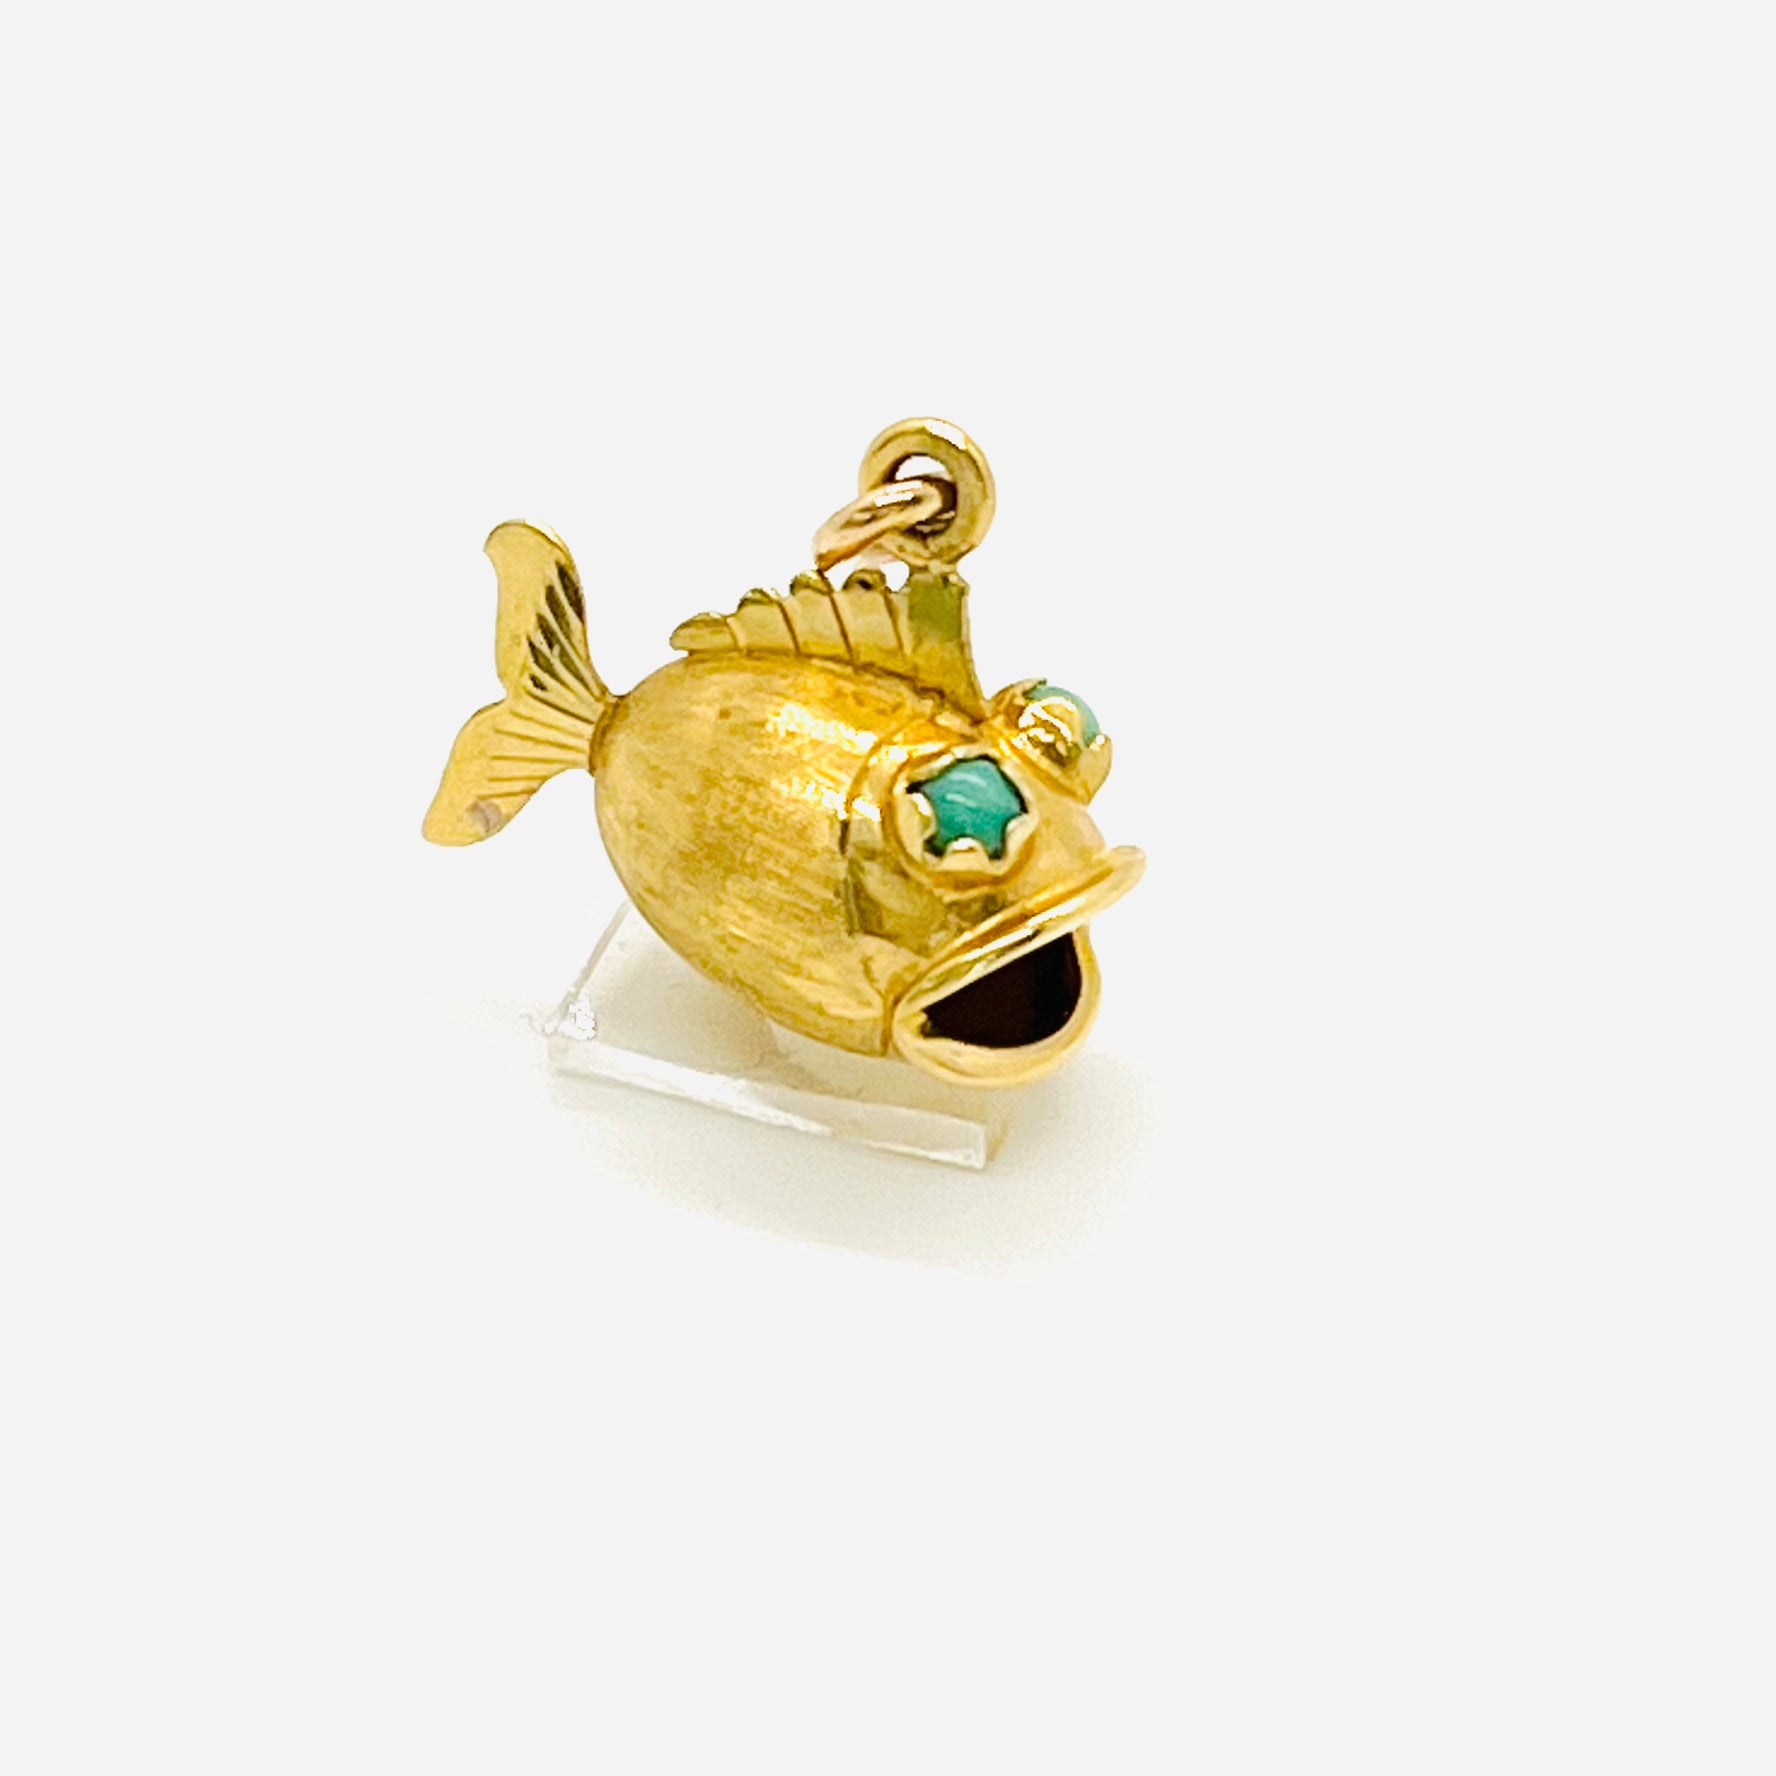 14k antique fish charm with turquoise eyes